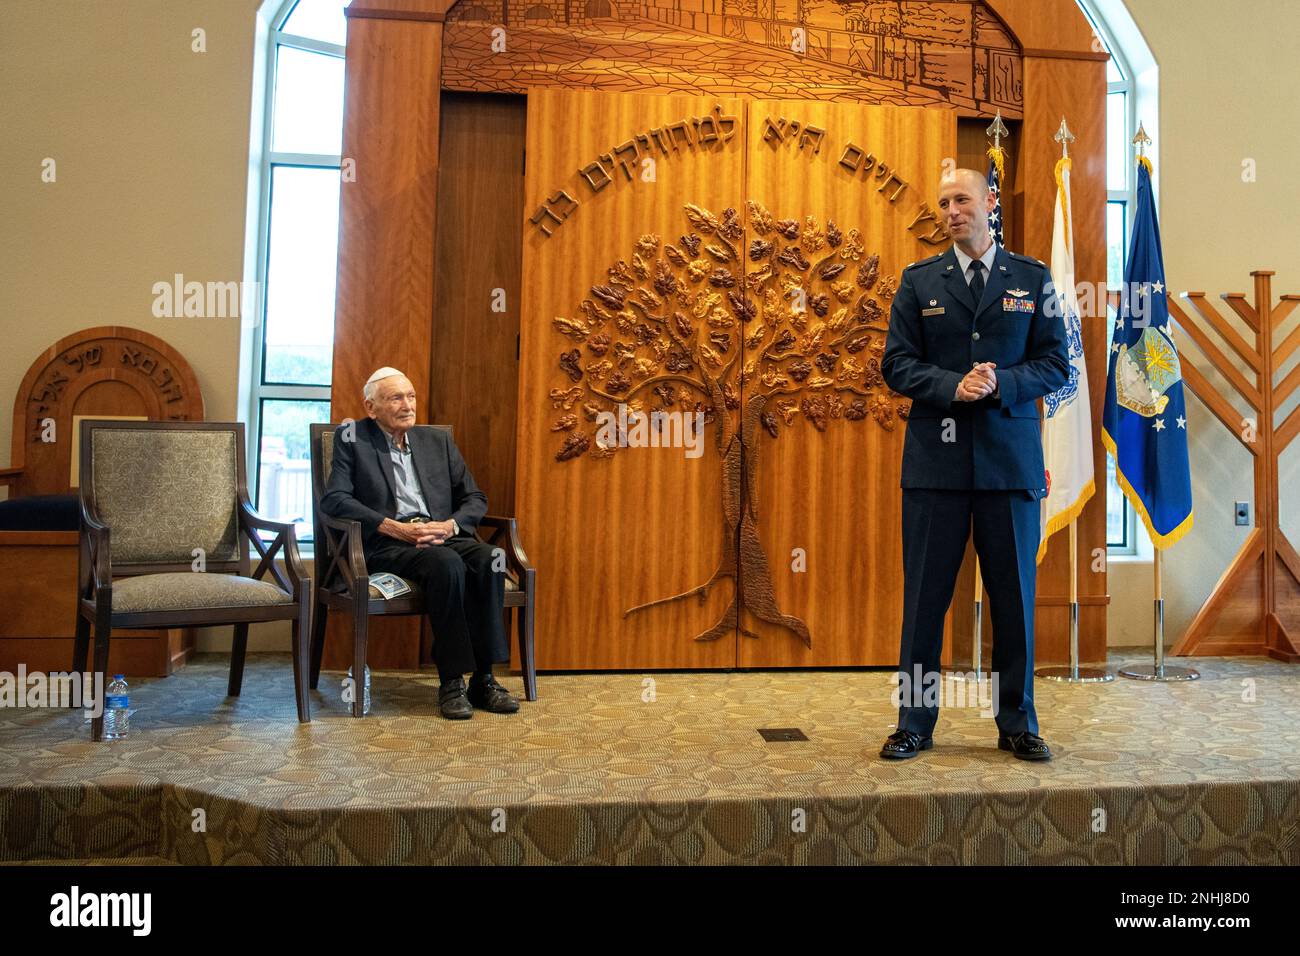 U.S. Air Force Lt. Col. Stein (right), 502nd Operations Support Squadron commander, provides opening remarks during U.S. Army Air Corps 1st Lt. Gerald Teldon’s, retired, award ceremony for his honorable service as a pilot on July 29, 2022, at the Chabad Center for Jewish Life and Learning, San Antonio, Texas. Teldon, born in Bronx, N.Y., in 1924, joined the military in 1944. He completed 62 missions during WWII and the Korean War. Lt. Col. Andrew Stein, 502nd Operations Support Squadron commander, was the presiding officers. The awards presented to Teldon are as follows: the Air Medal; America Stock Photo